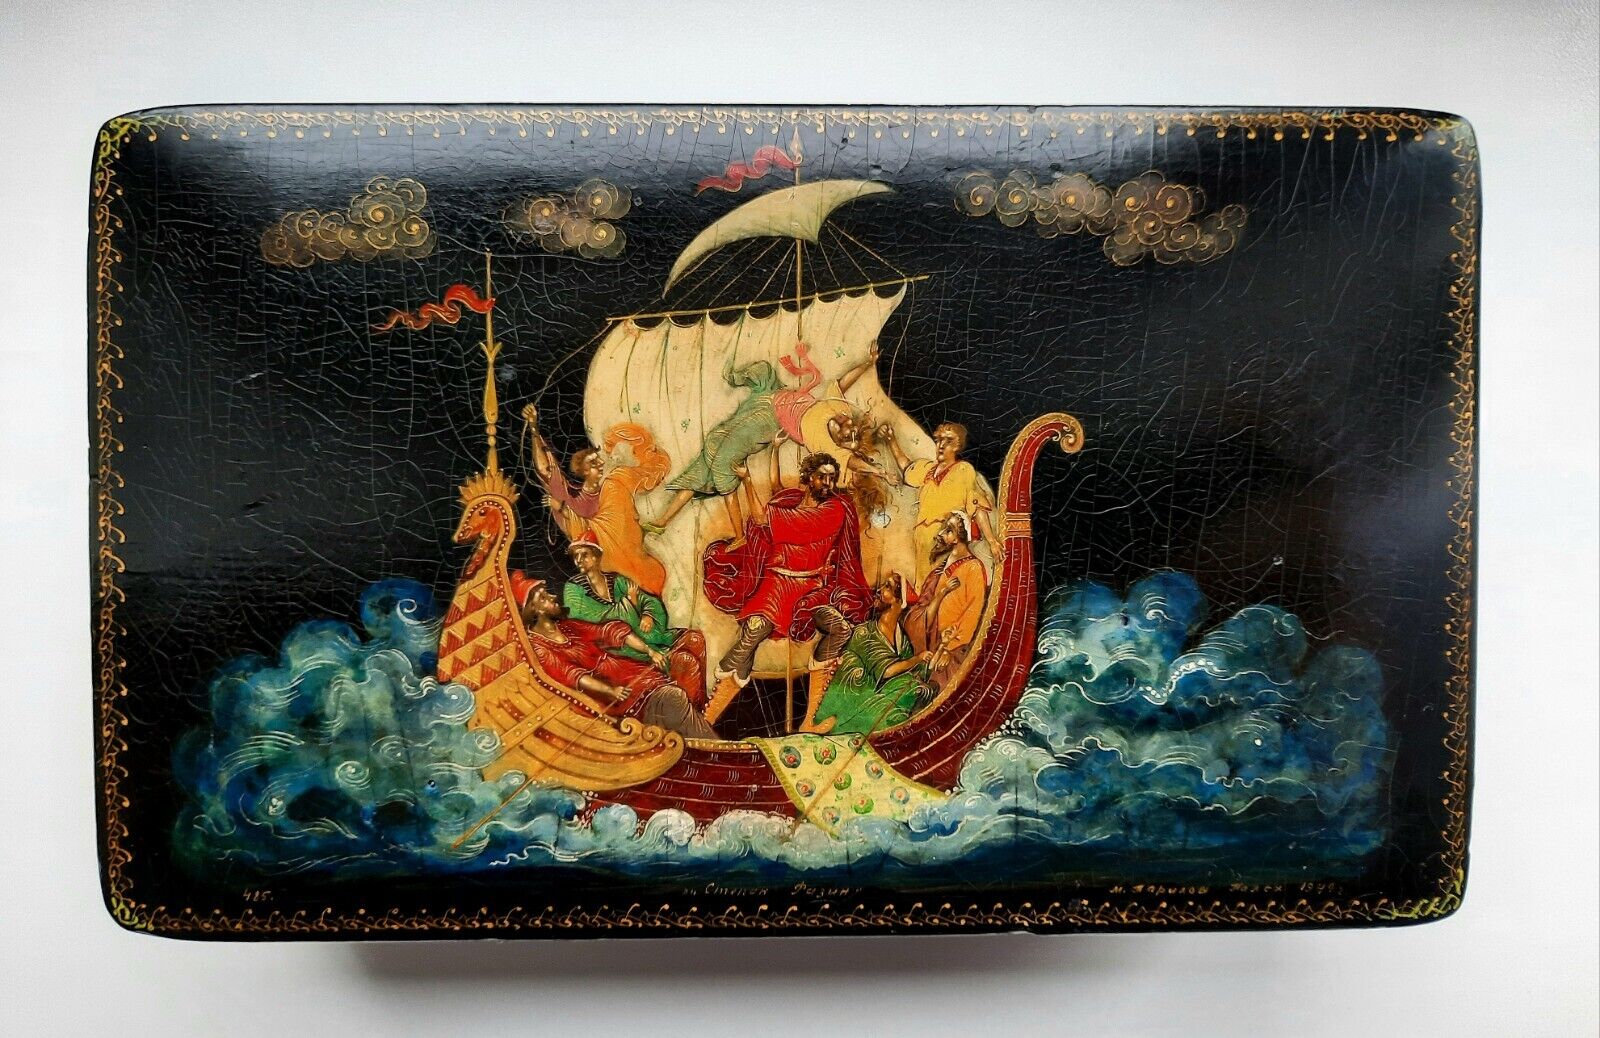 Palekh 1940's Russian Lacquer Box Vintage Rarity Handmade Pappier-Mache Mstera